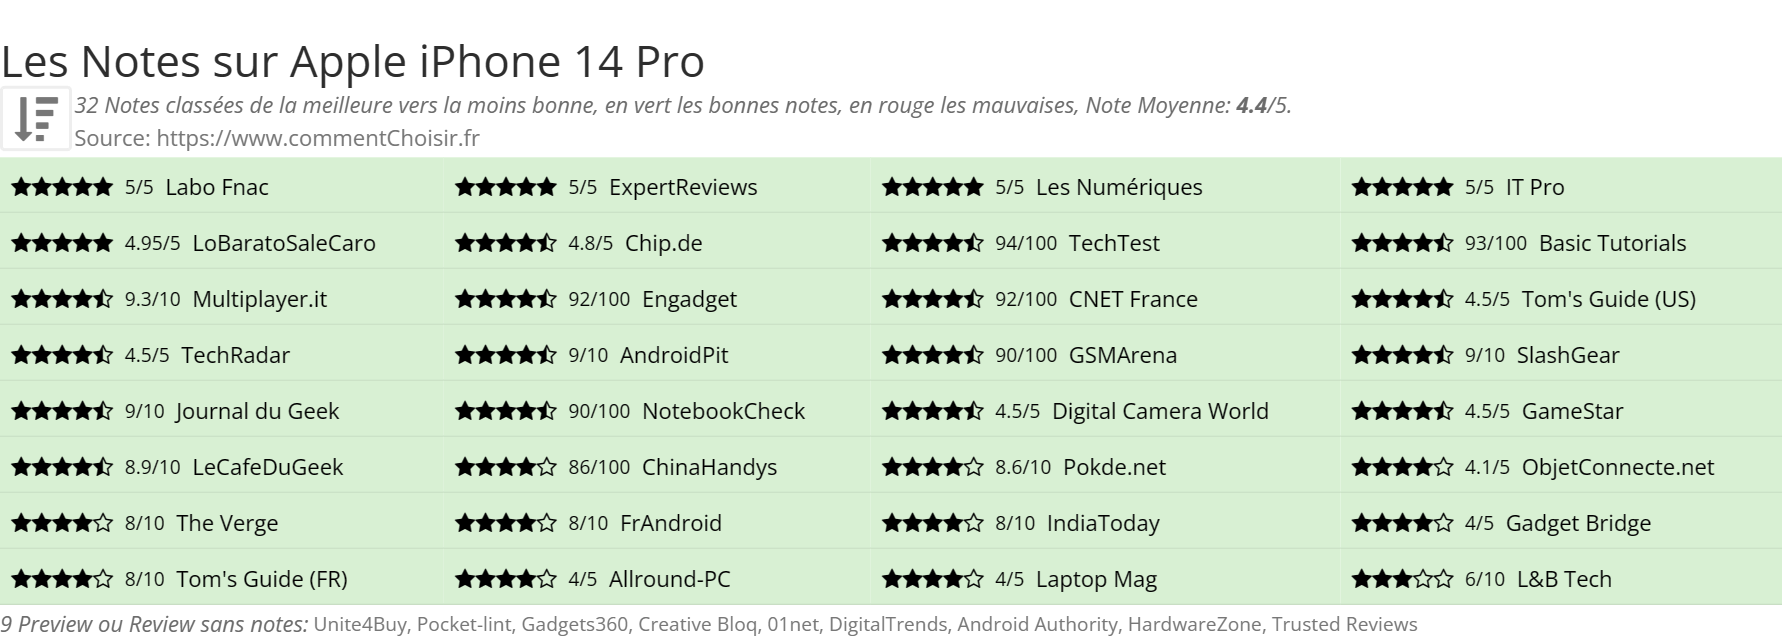 Ratings Apple iPhone 14 Pro